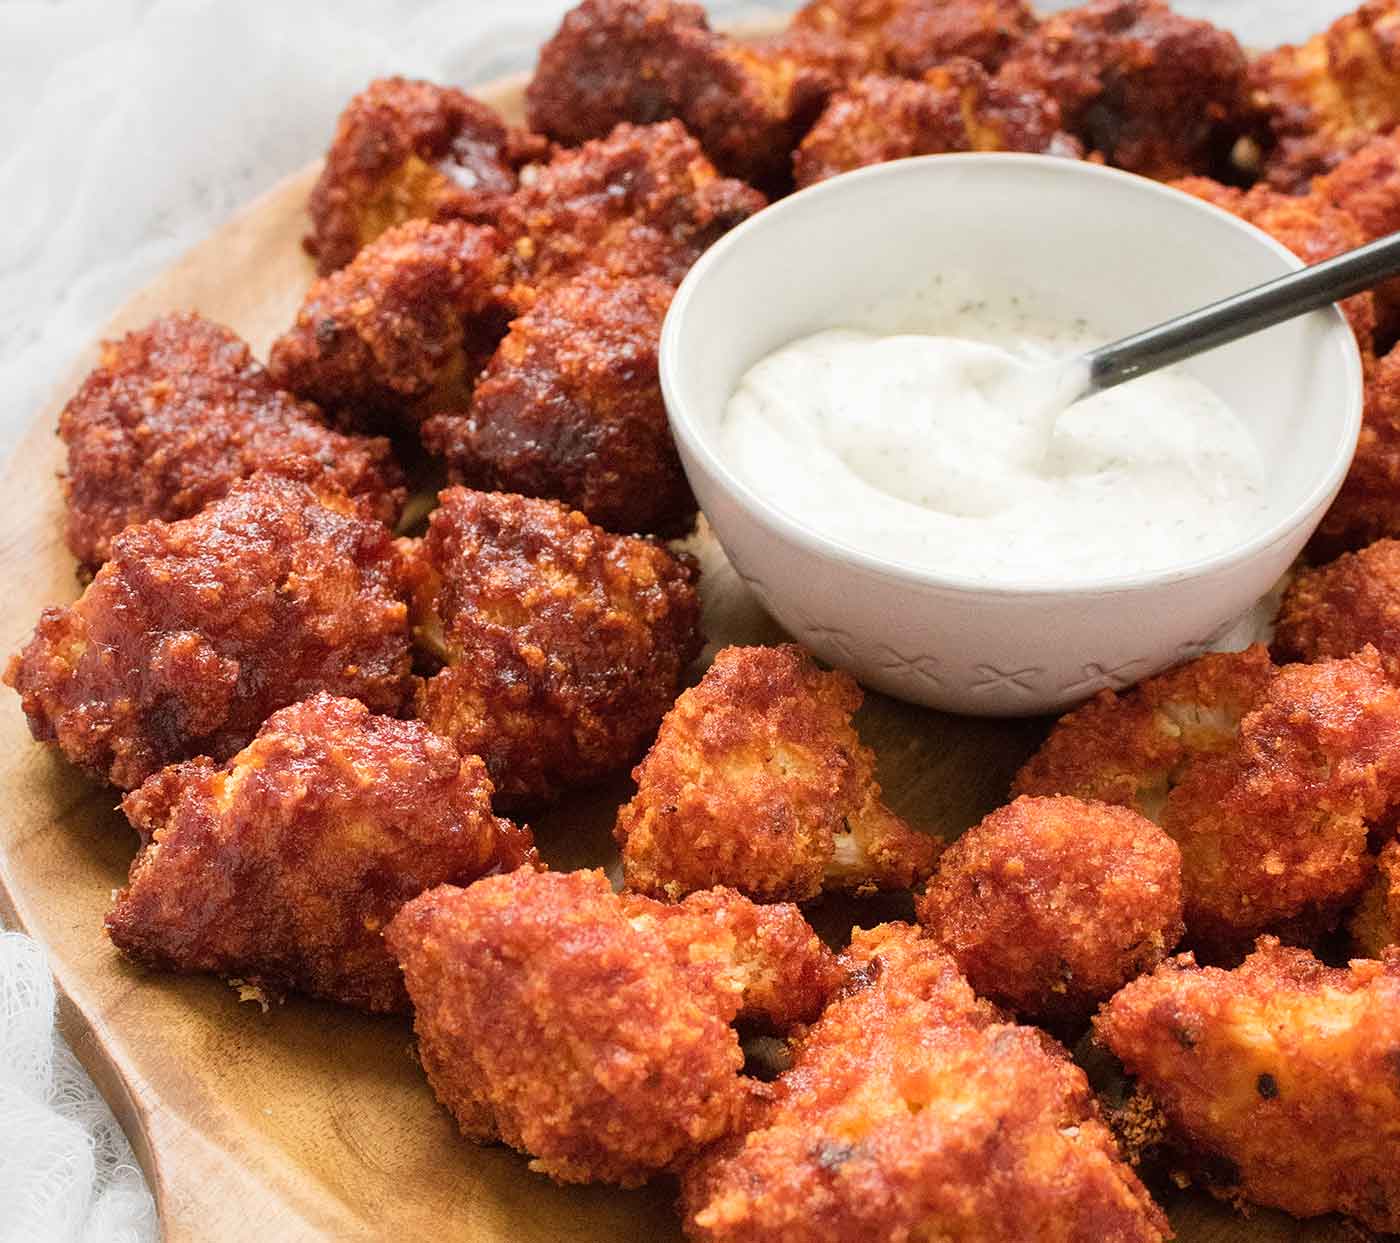 Sweet & Spicy Cauliflower Bites served with ranch dipping sauce